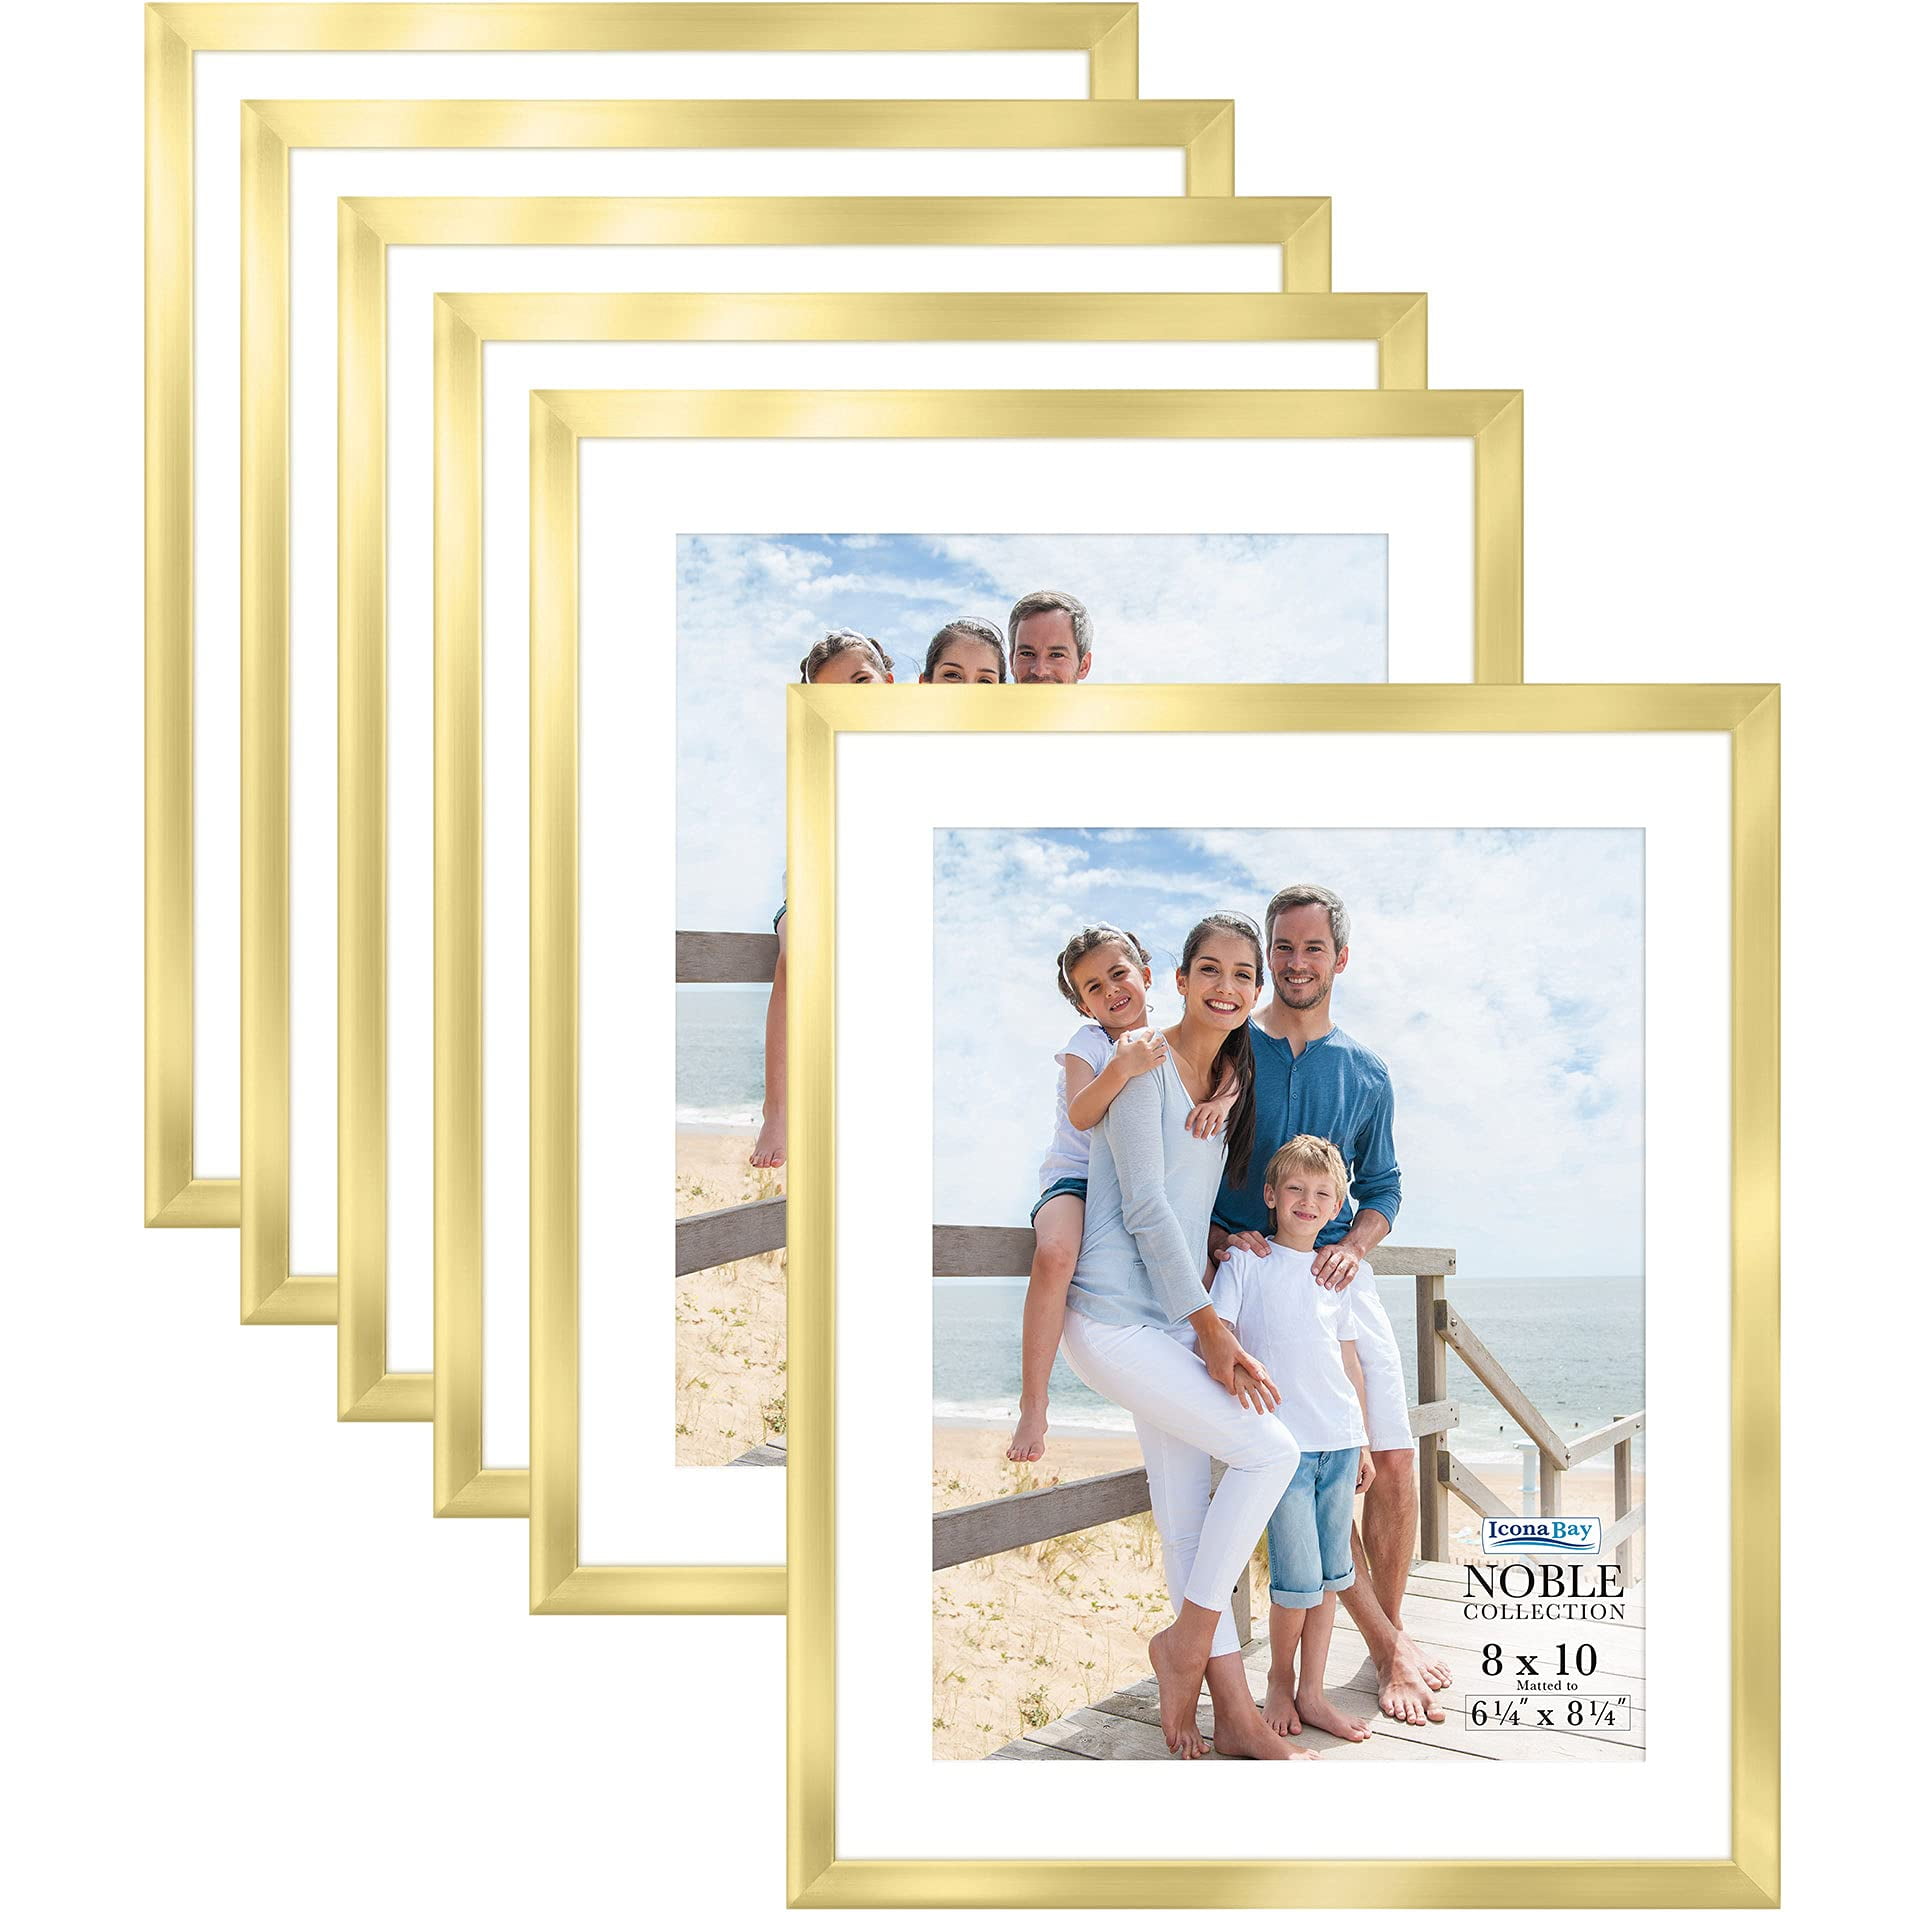 Icona Bay 8x10 Picture Frame.fits standard 8 x 10 pictures or prints,1 Pack,Gold